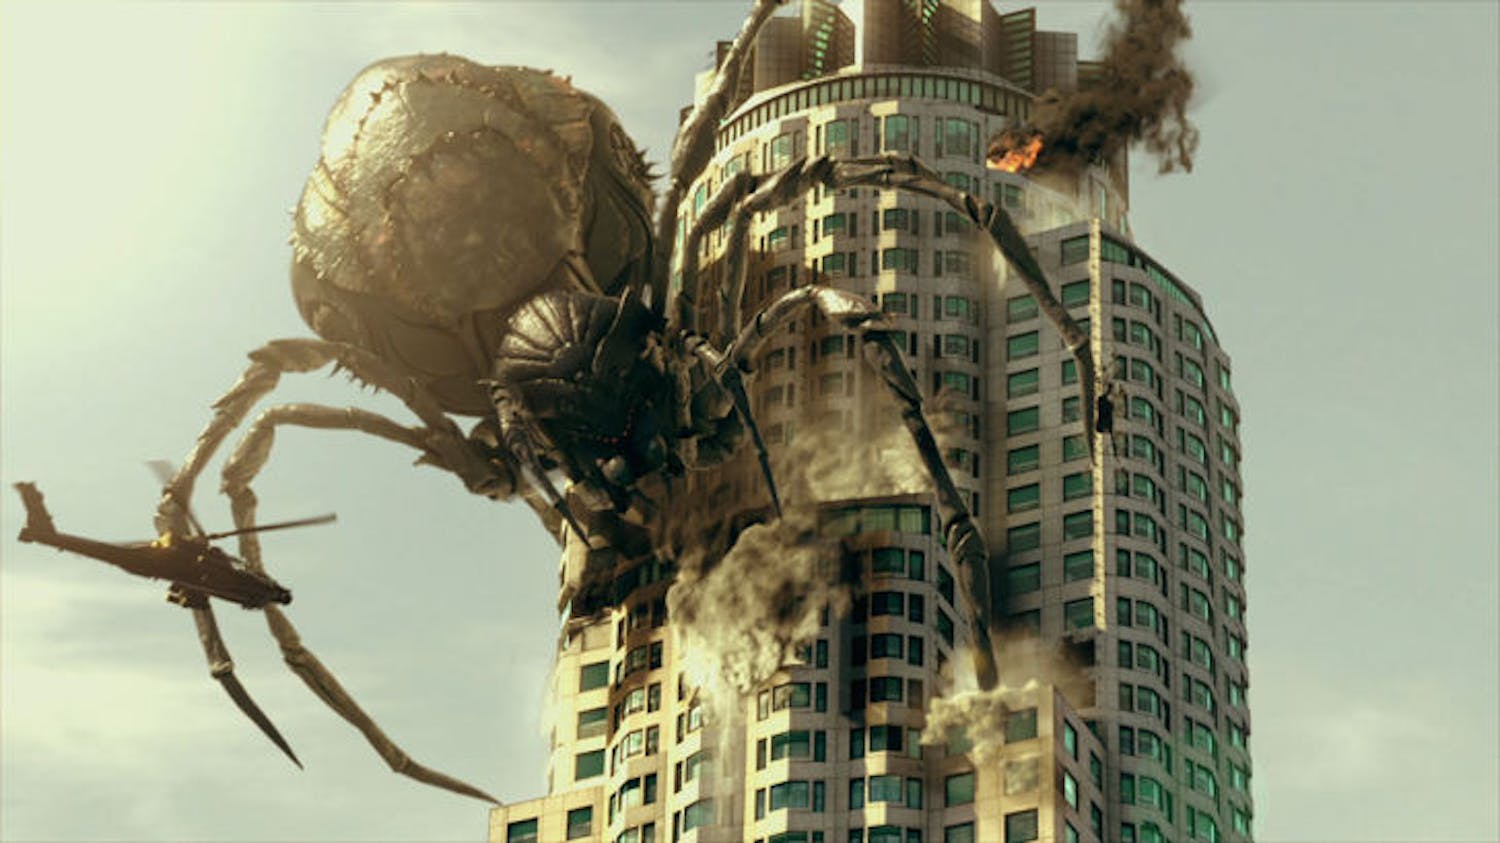 “Big Ass Spider!” a sci-fi movie about a giant alien spider that rampages the city of Los Angeles, premieres Friday. The movie is playing at Gators 4 Cinema at 10 p.m. “It’s going to be something good,” said Jason McNeal, UF’s English department film and equipment manager.